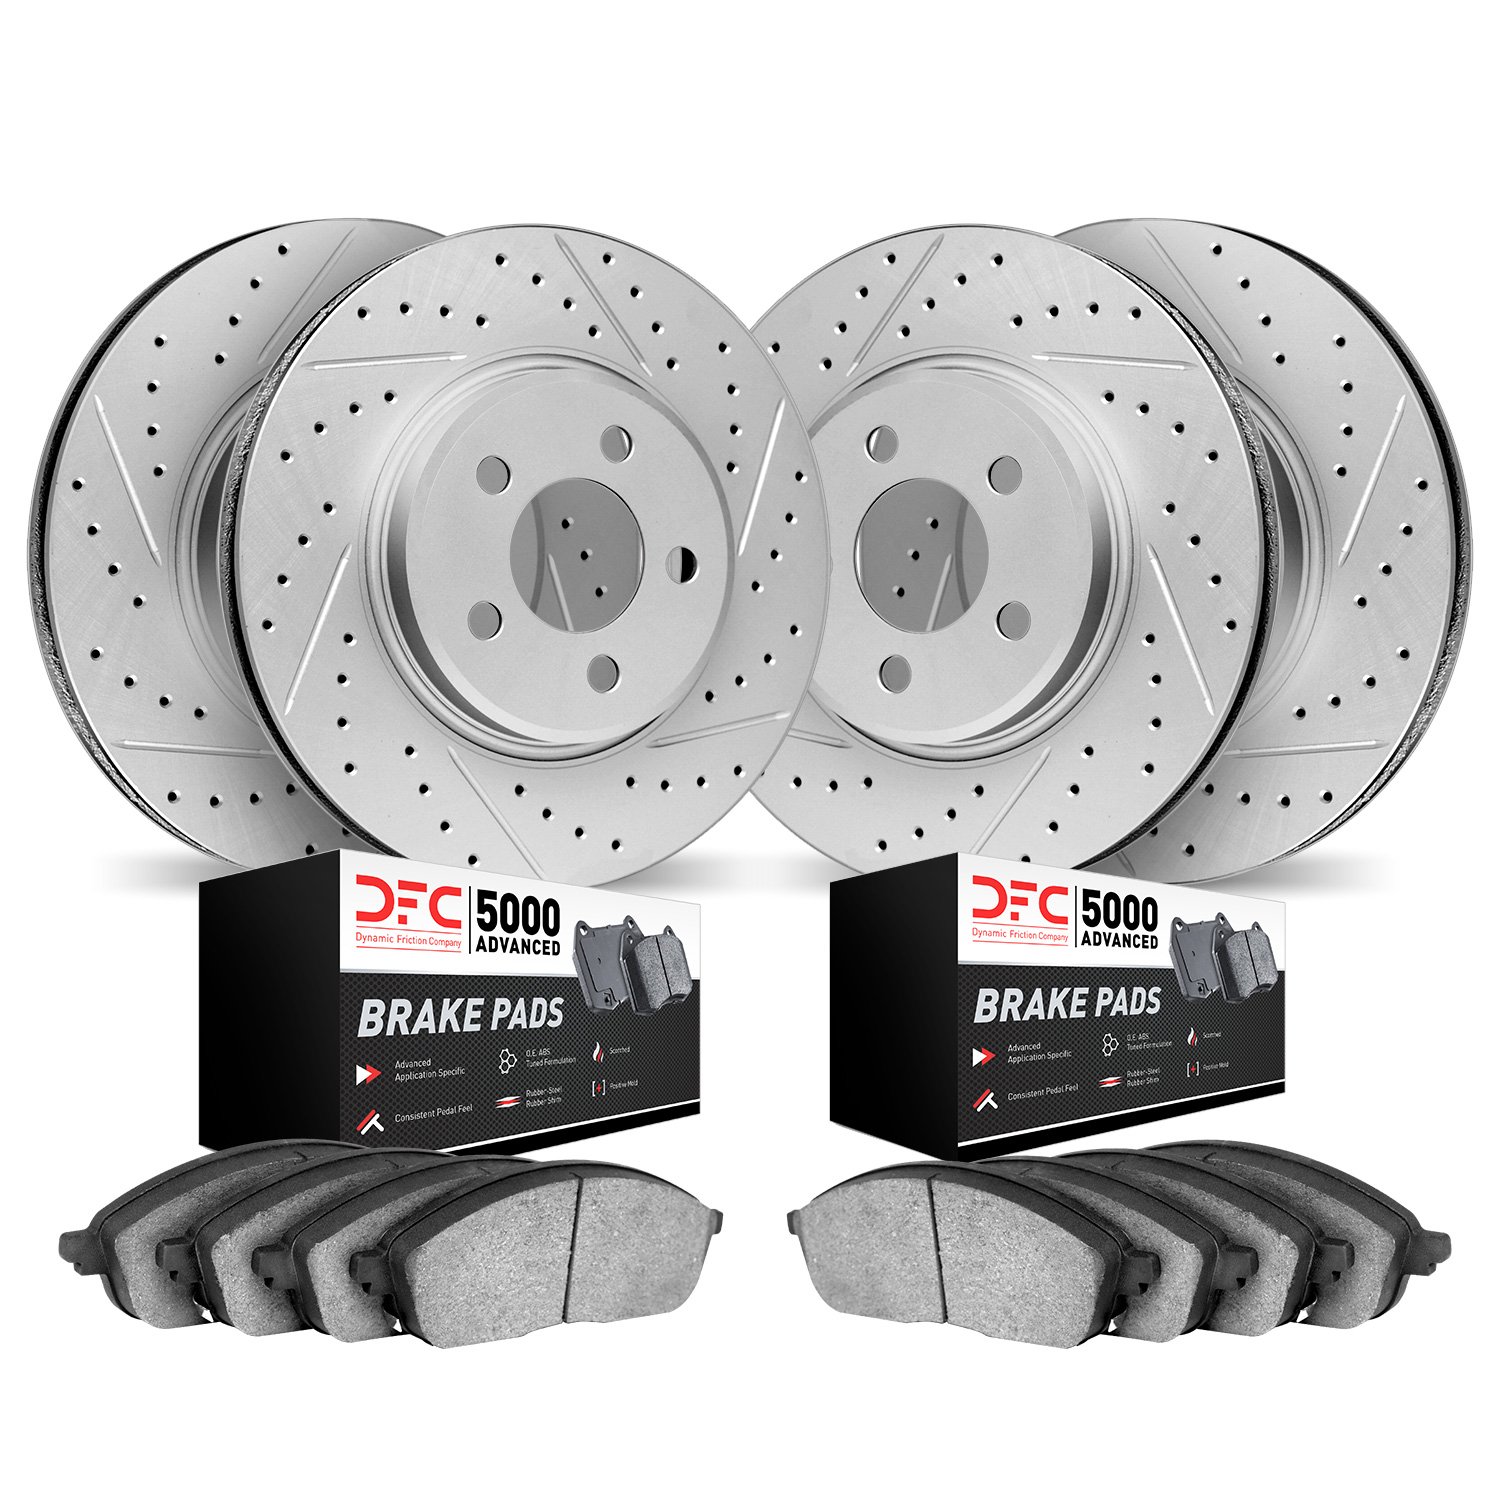 2504-63007 Geoperformance Drilled/Slotted Rotors w/5000 Advanced Brake Pads Kit, 2019-2019 Mercedes-Benz, Position: Front and Re